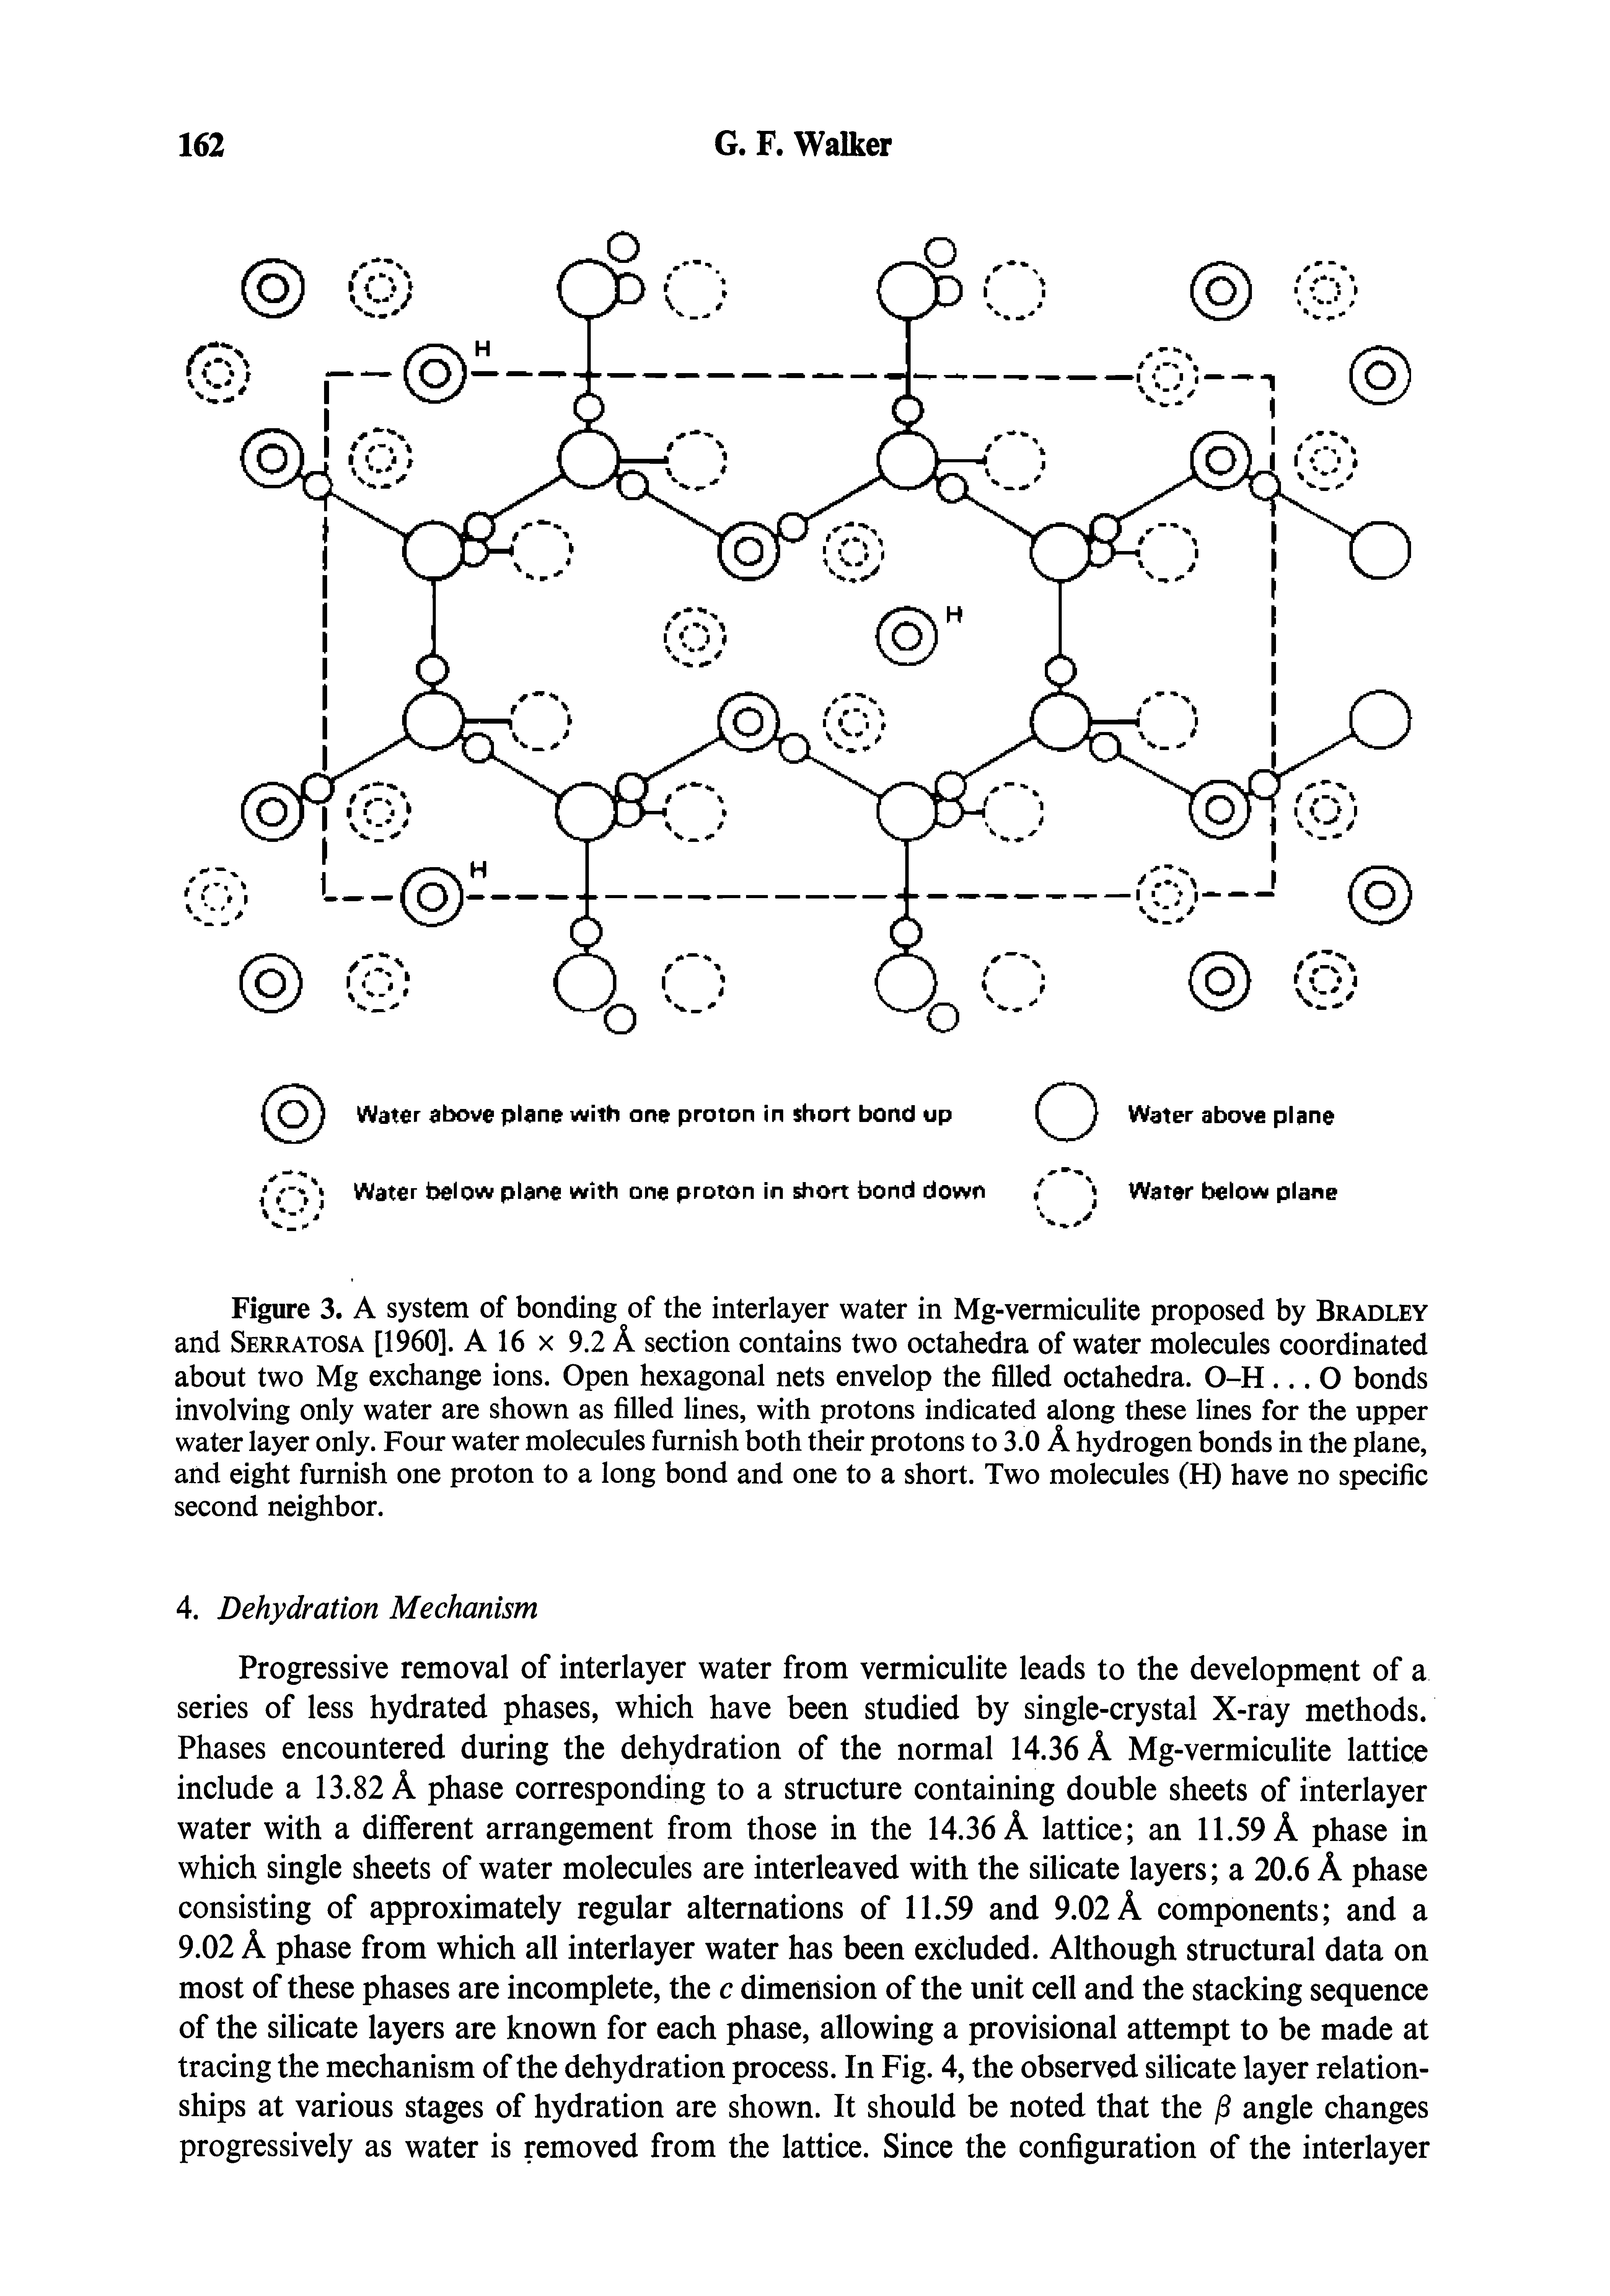 Figure 3. A system of bonding of the interlayer water in Mg-vermiculite proposed by Bradley and Serratosa [I960]. A 16 x 9.2 A section contains two octahedra of water molecules coordinated about two Mg exchange ions. Open hexagonal nets envelop the filled octahedra. O-H. .. O bonds involving only water are shown as filled lines, with protons indicated along these lines for the upper water layer only. Four water molecules furnish both their protons to 3.0 A hydrogen bonds in the plane, and eight furnish one proton to a long bond and one to a short. Two molecules (H) have no specific second neighbor.